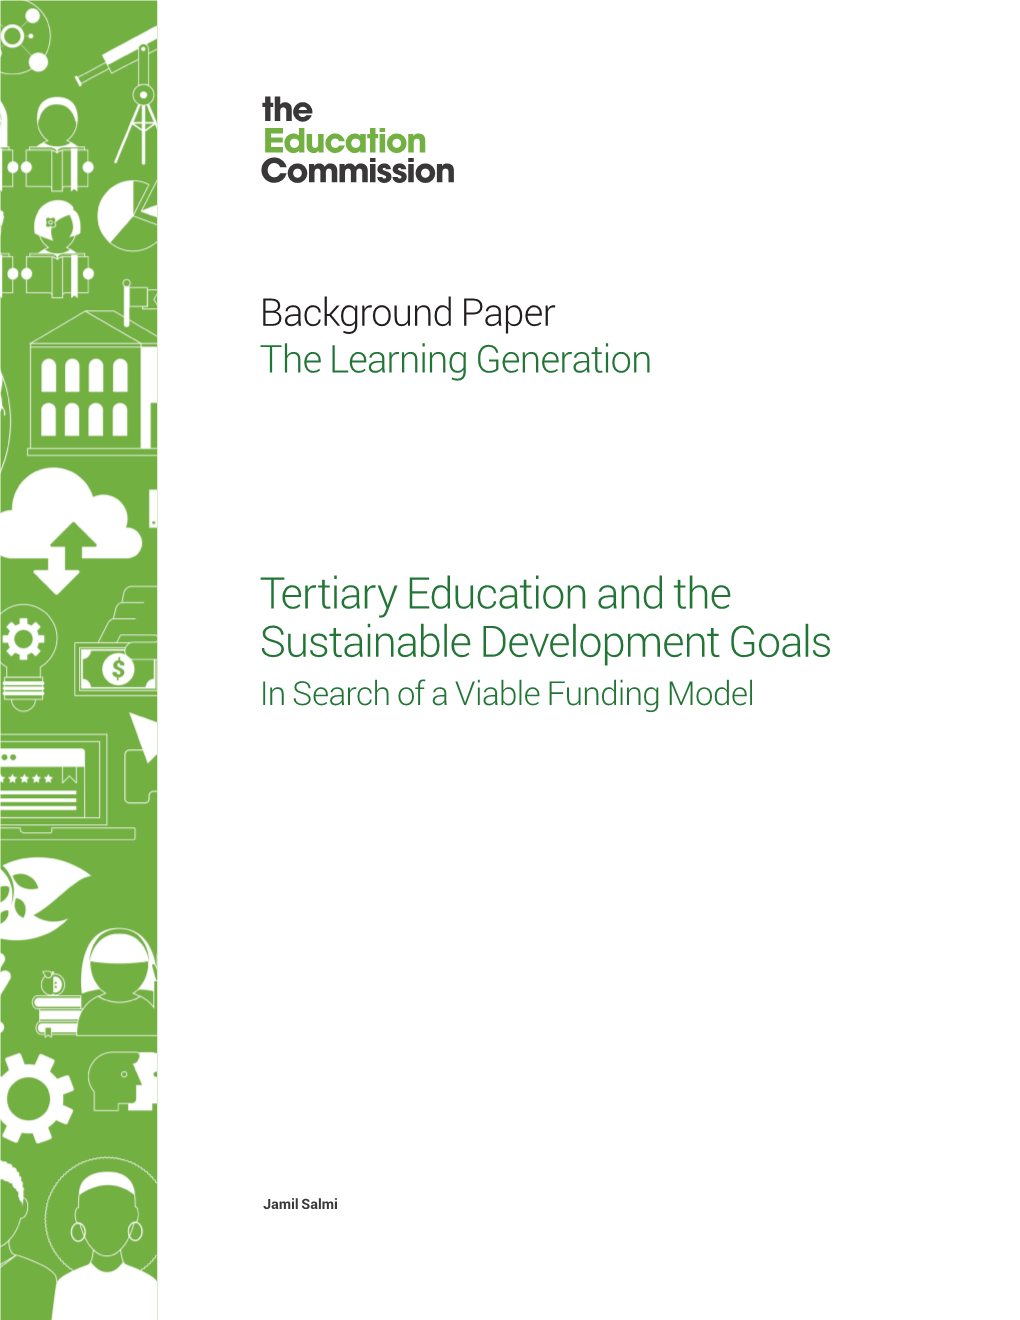 Tertiary Education and the Sustainable Development Goals in Search of a Viable Funding Model